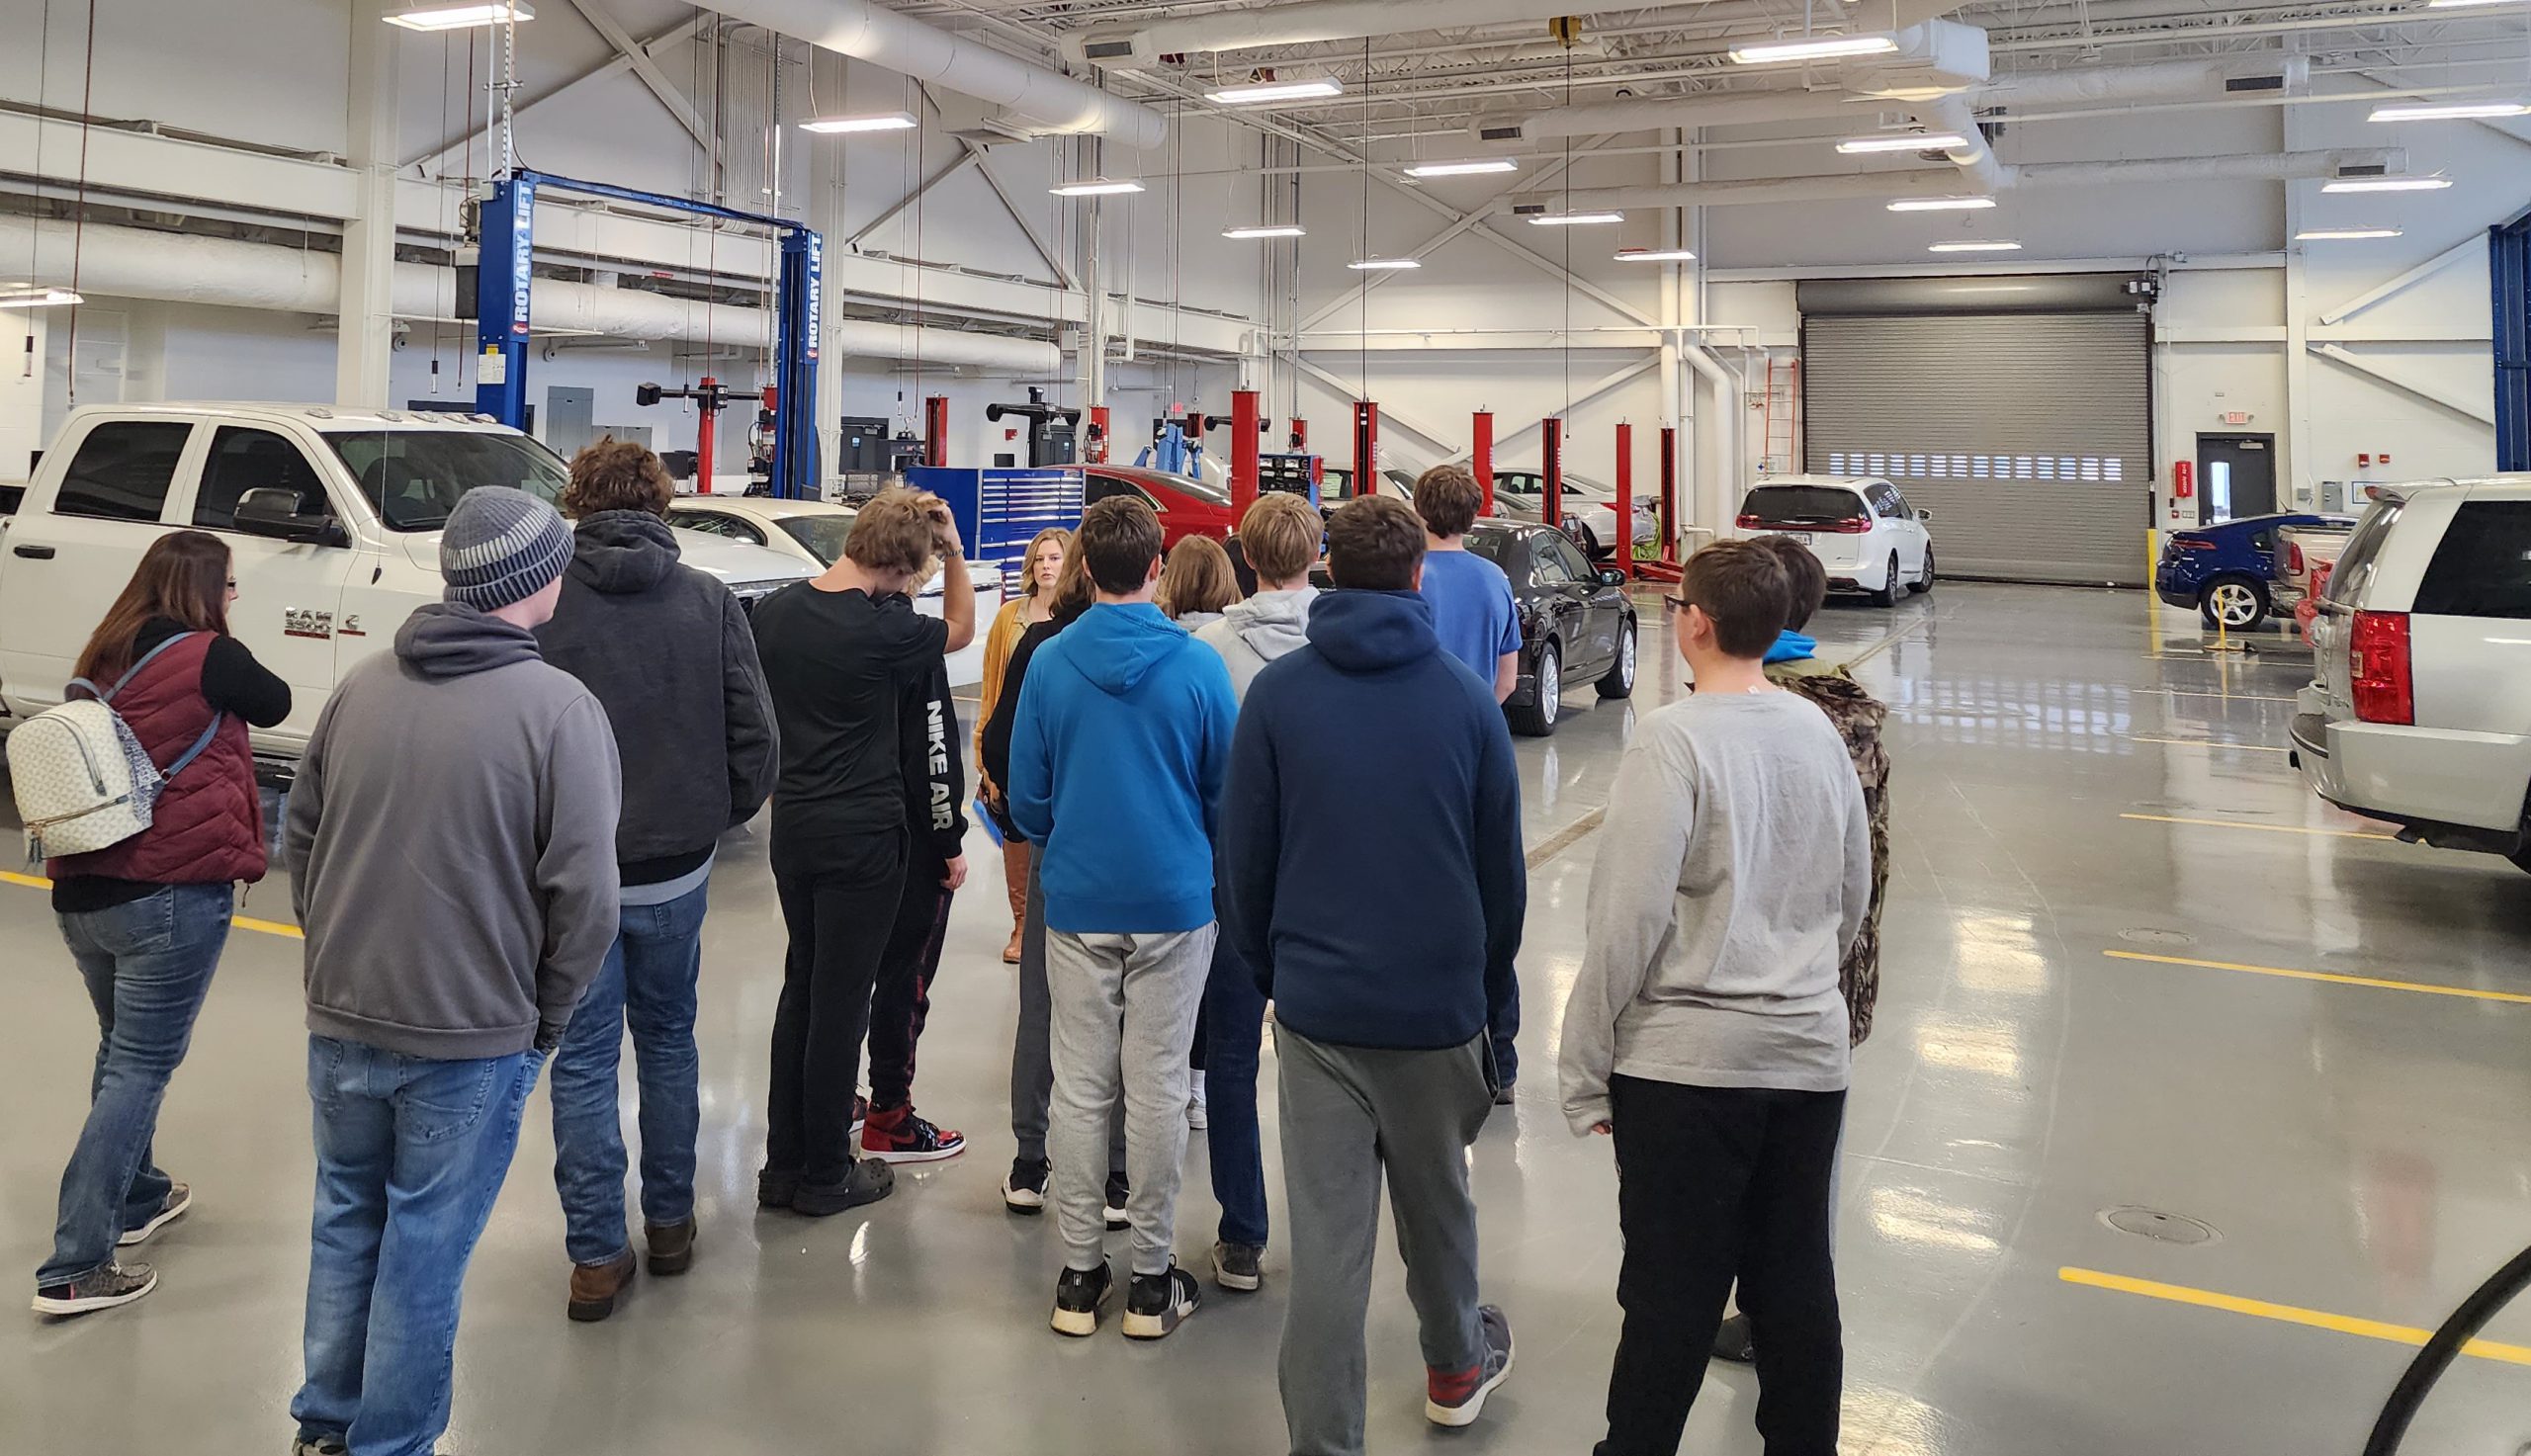 An LLCC recruiter speaking to a group of students in the auto tech lab